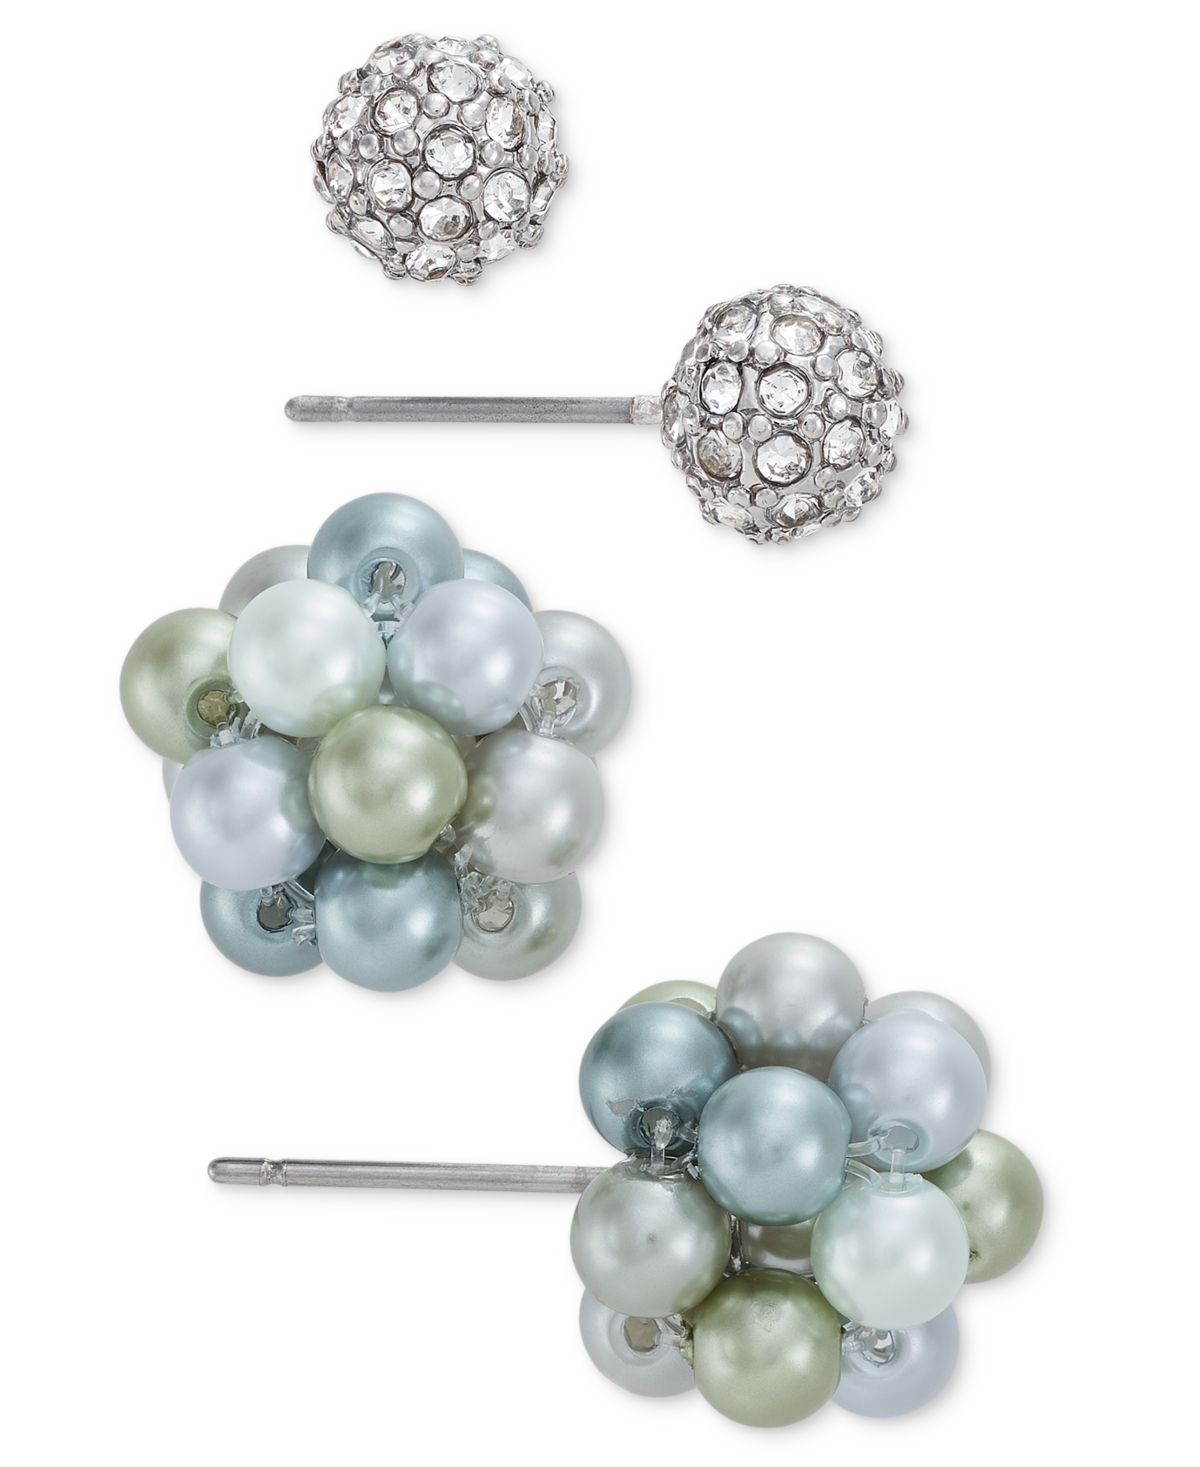 Silver-Tone 2-Pc. Set Pave Fireball & Color Imitation Pearl Stud Earrings, Created for Macy's - Multi